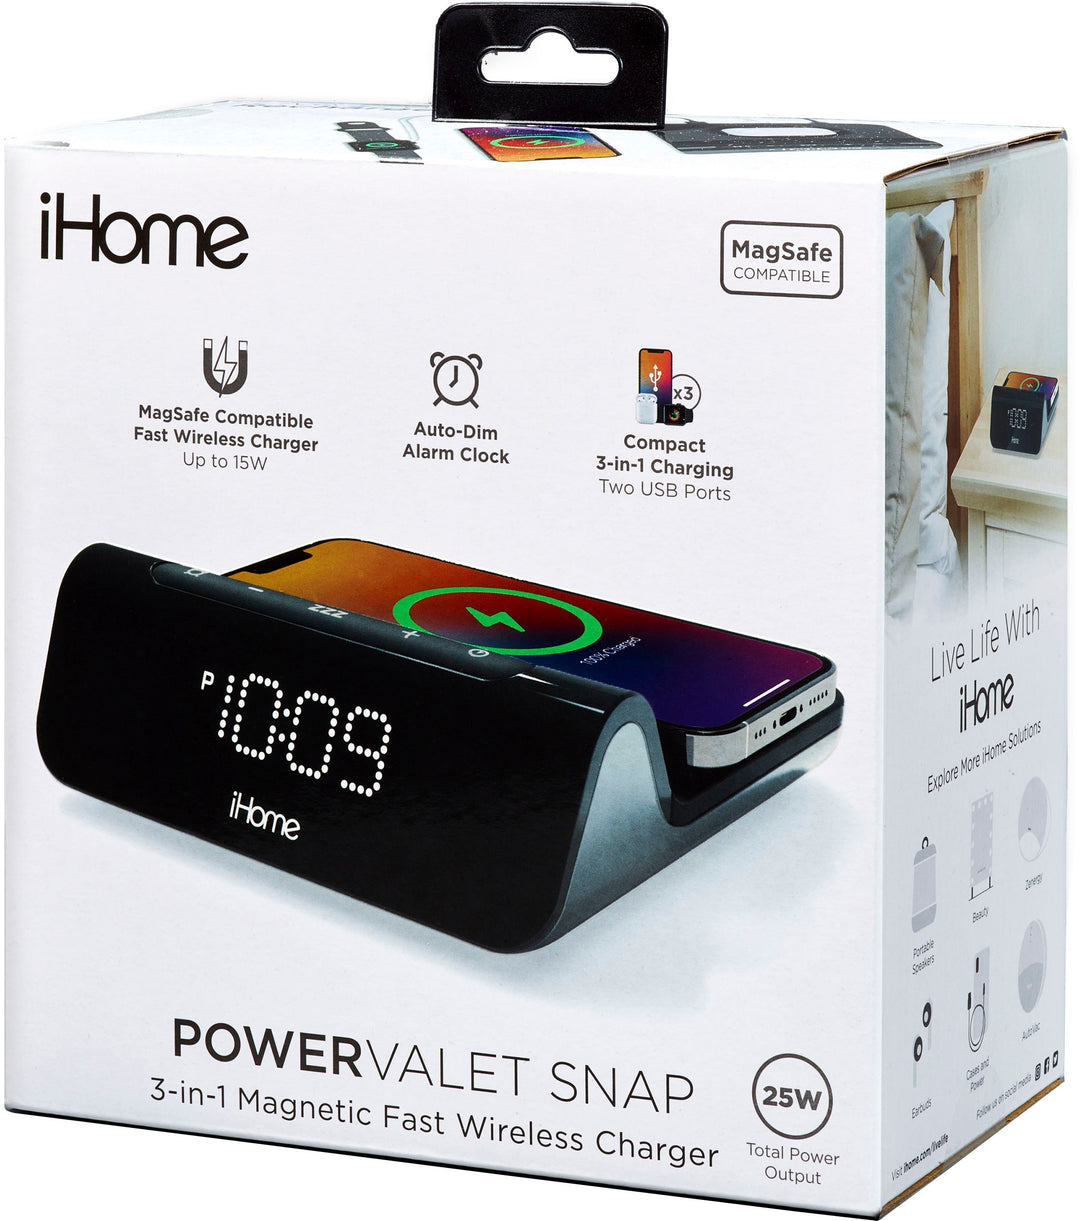 iHome - POWERVALET PRO 3 in 1 Magnetic Fast Wireless Charger_12